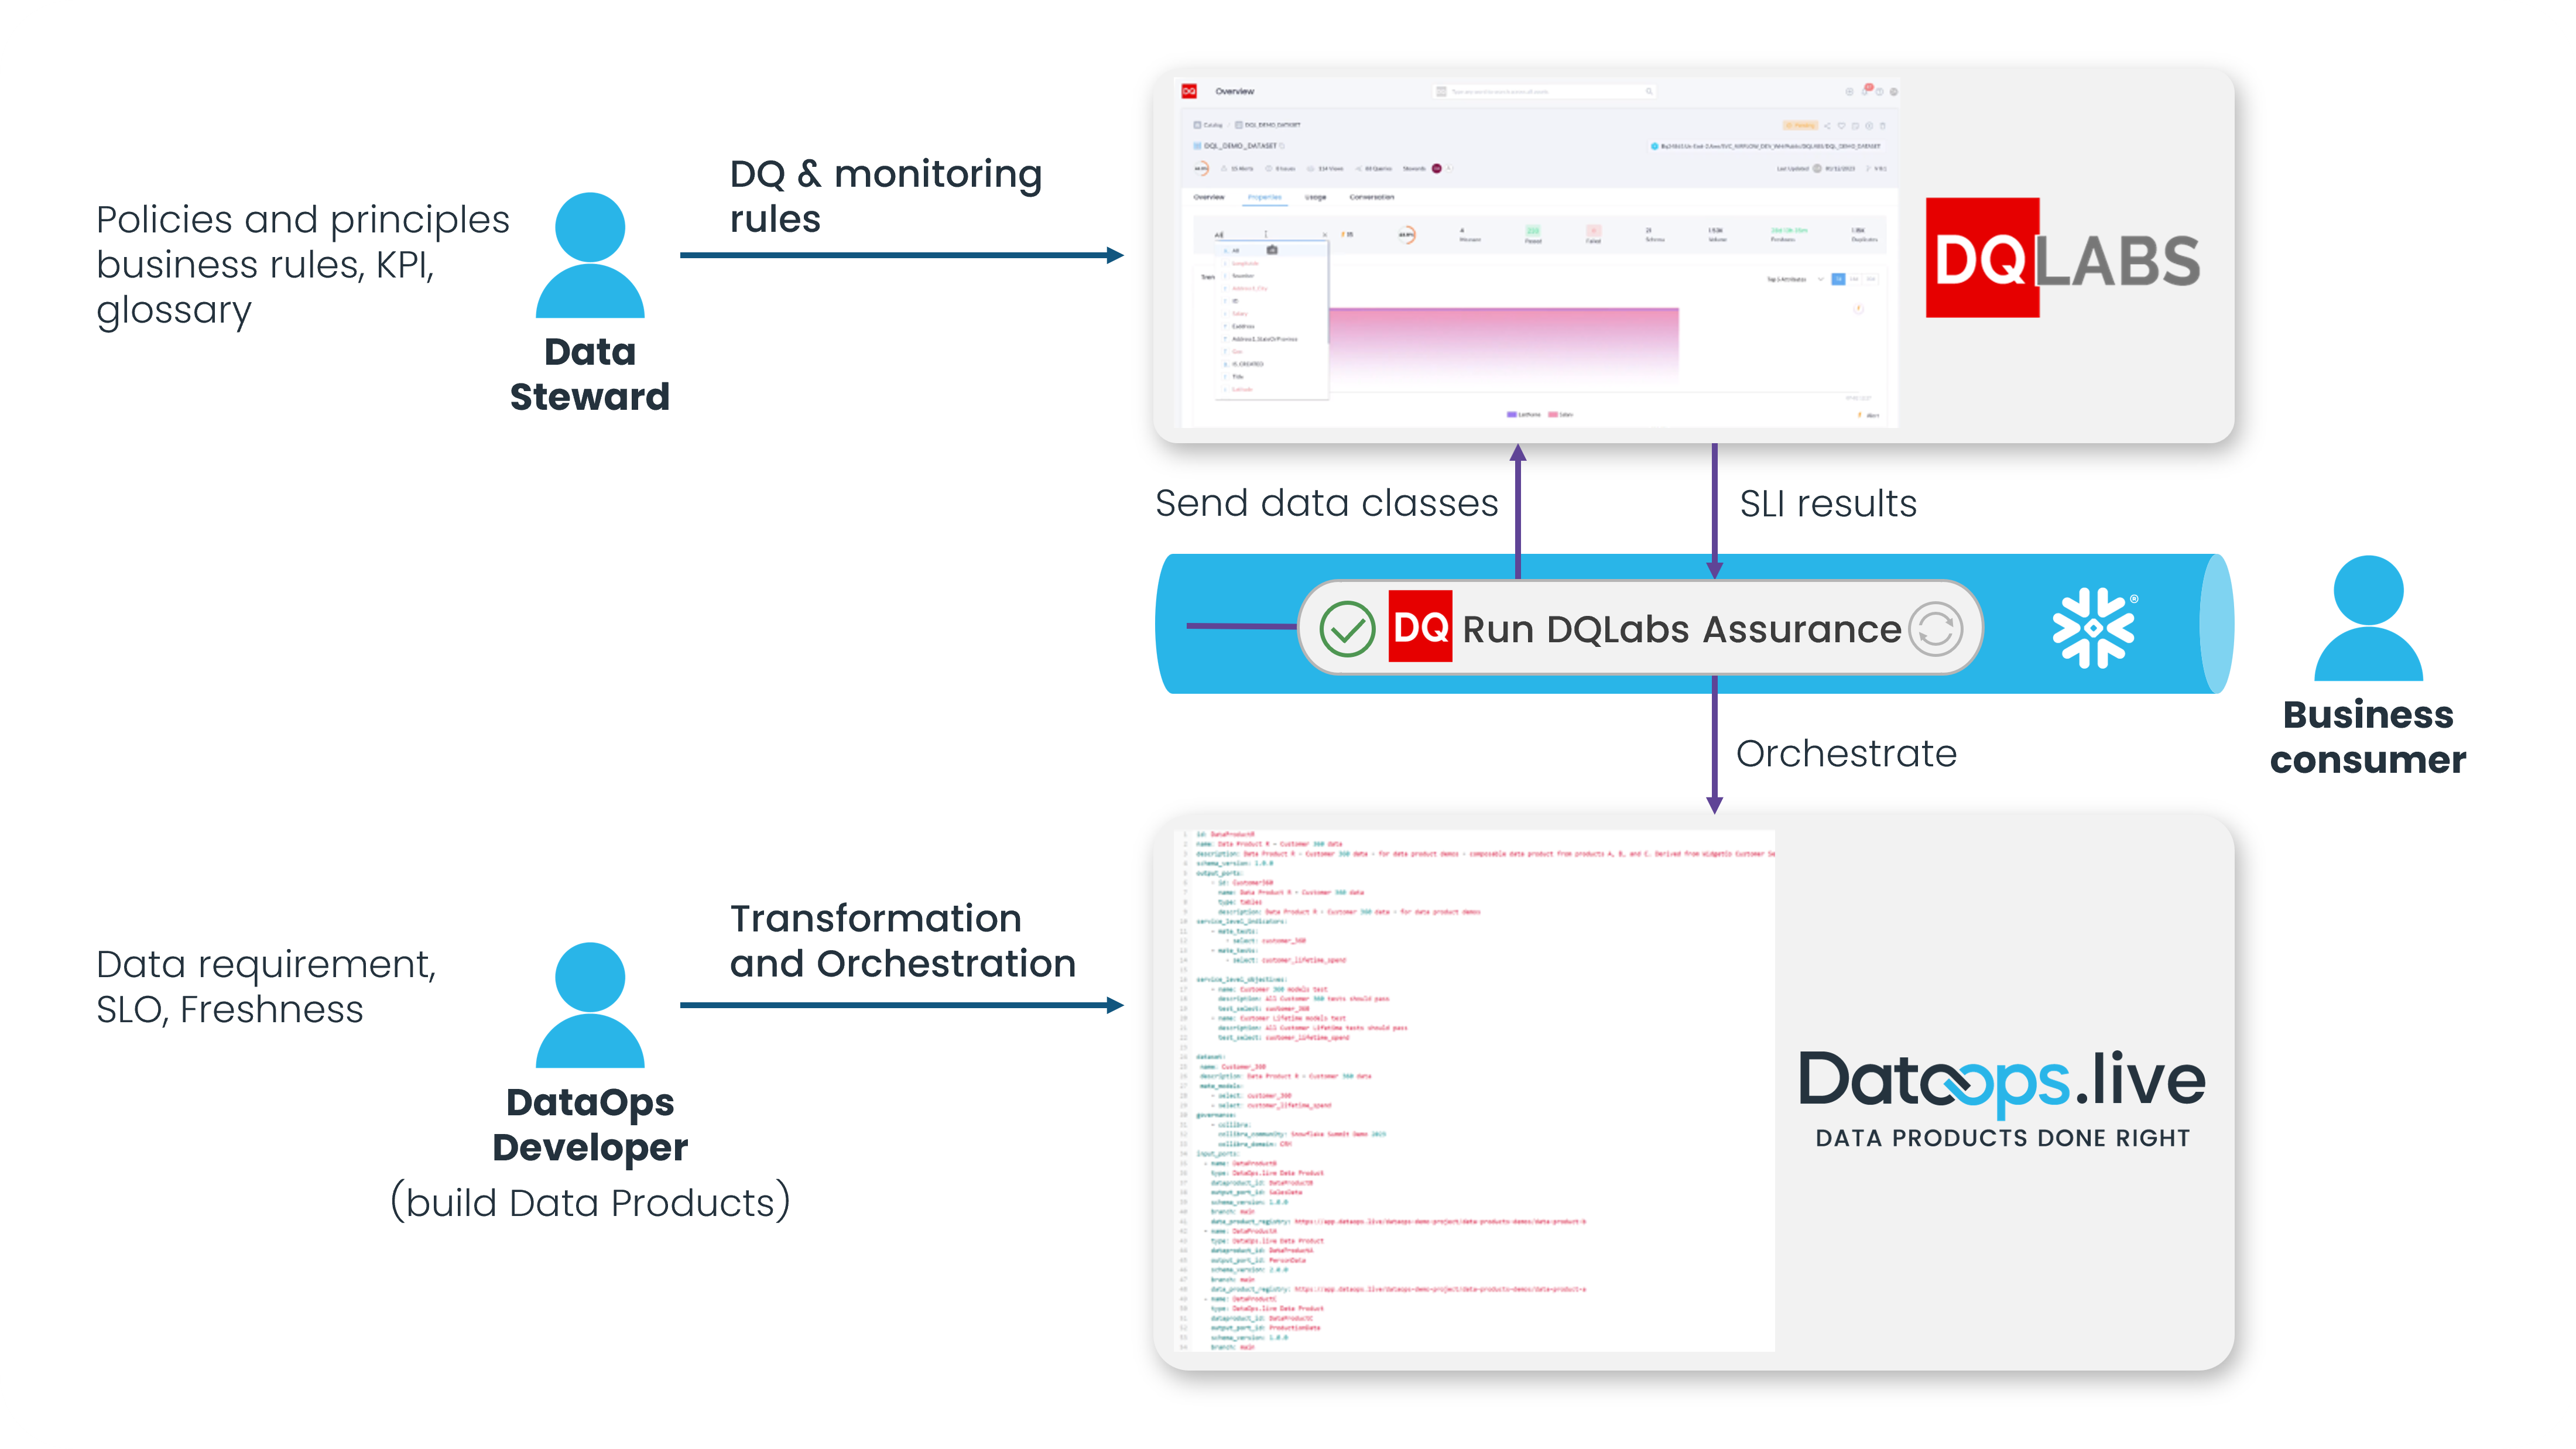 DQLabs and DataOps.live-1